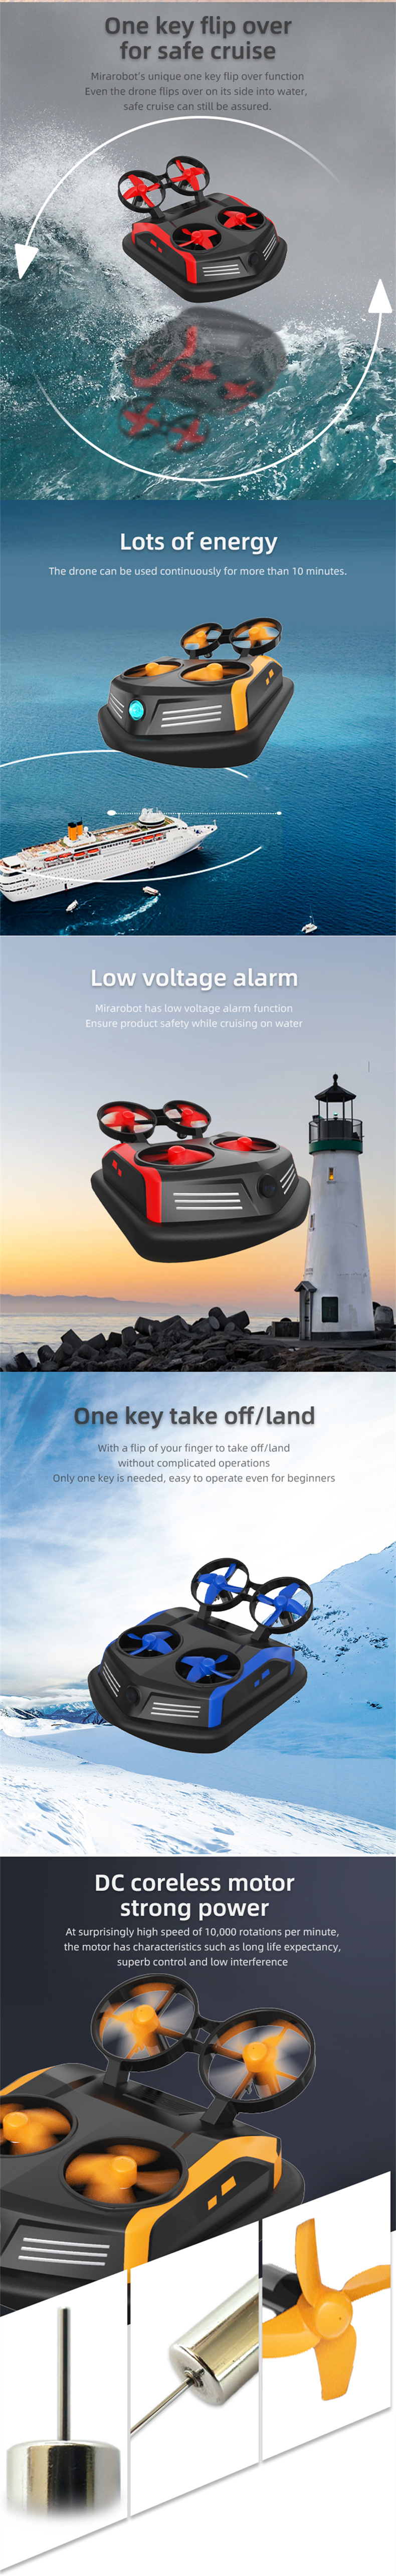 Mirarobot Domain S200 LED 3-in-1 Flying Air Boat Land Driving Mode Detachable RC Drone Quadcopter RTF - Photo: 2